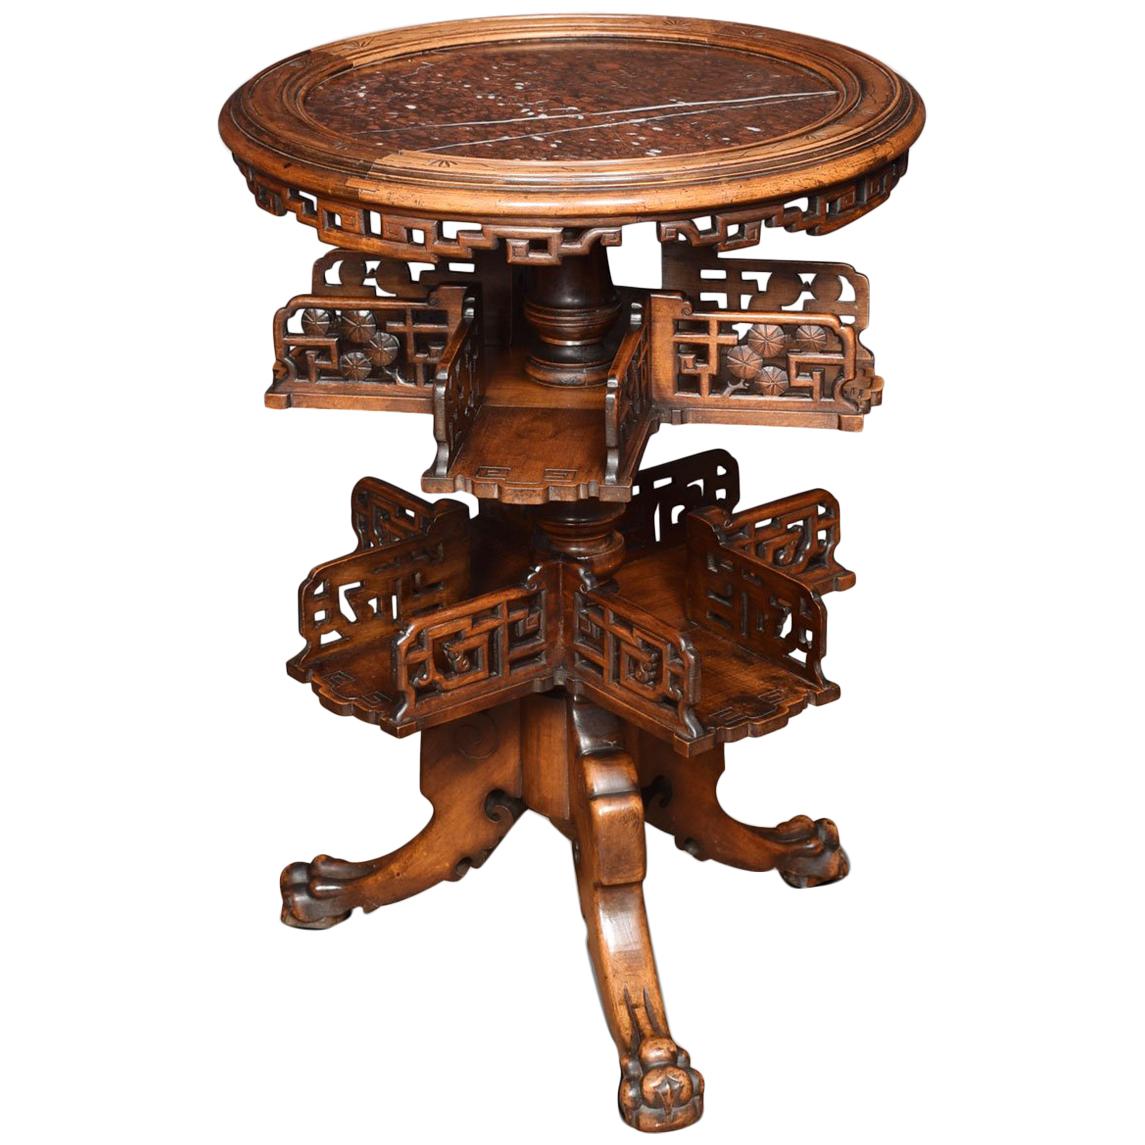 Chinese Hardwood and Marble Revolving Book Table